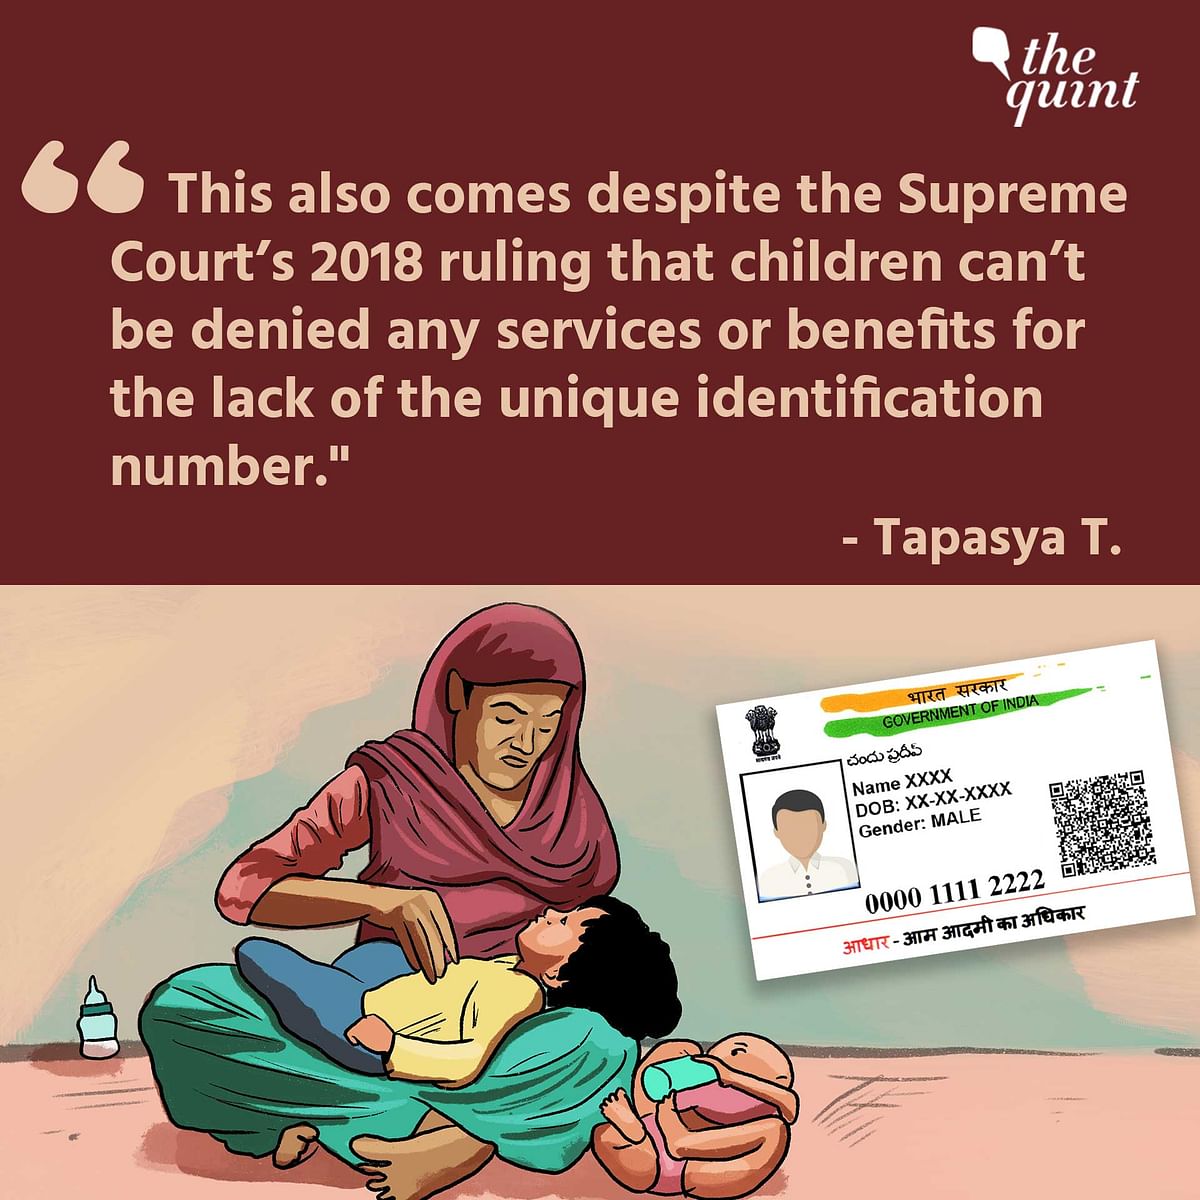 Across India, only 23% of the children below 5 years of age have Aadhaar identification.